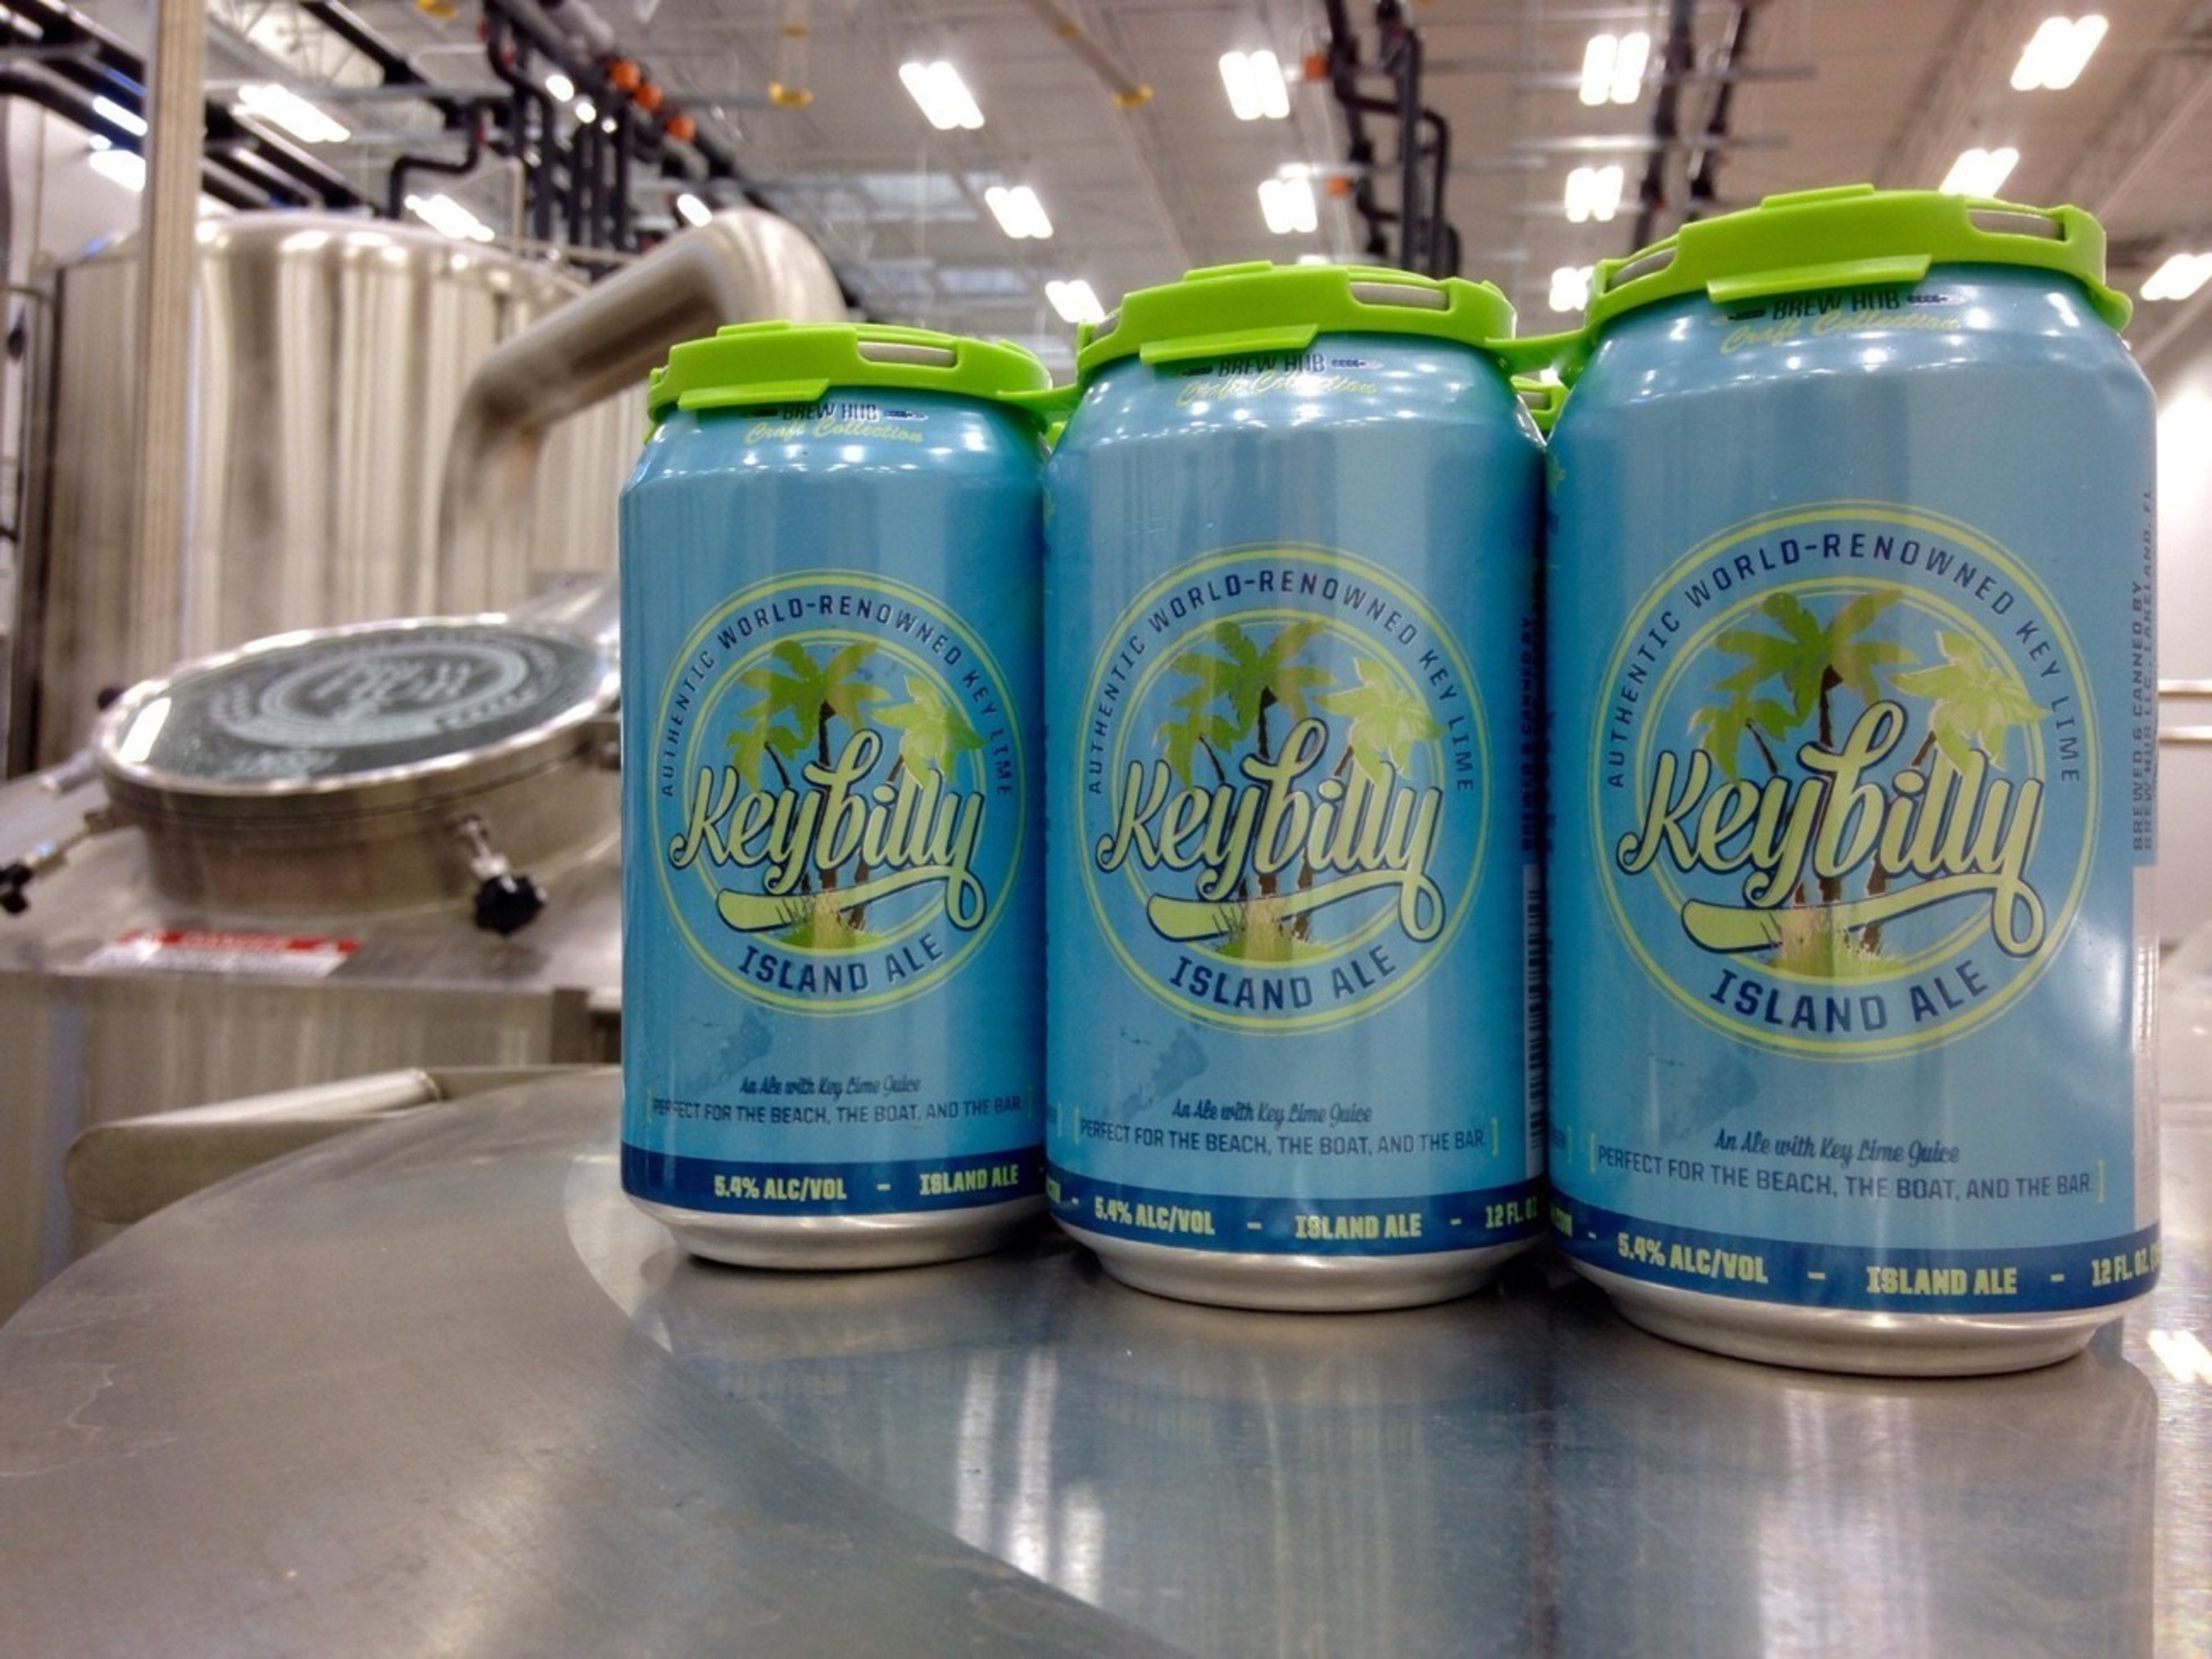 Six-pack of Keybilly Island Ale at Brew Hub in Lakeland, Florida.